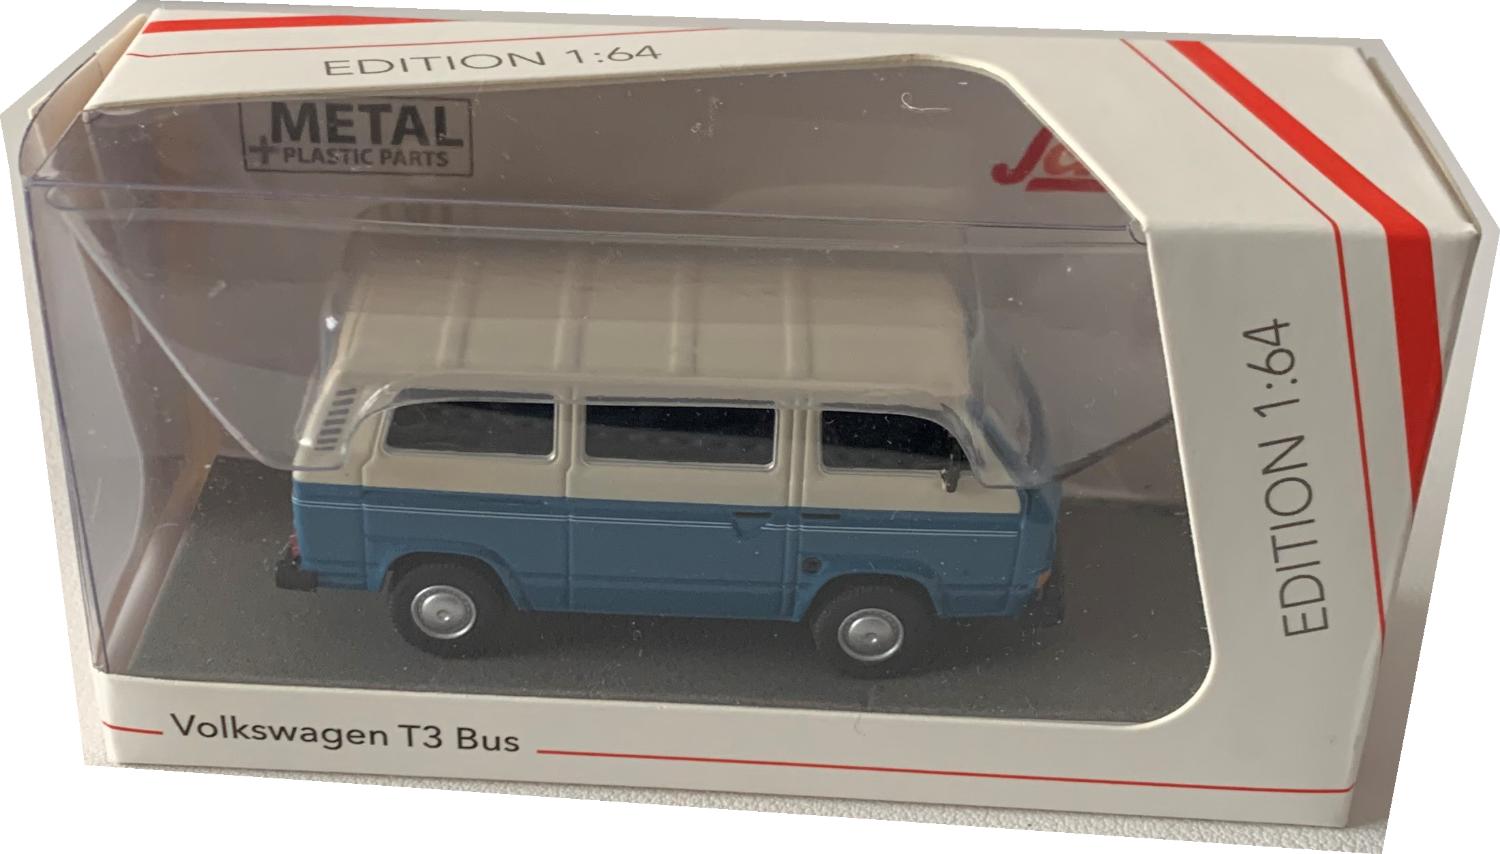 Volkswagen T3 Bus in blue / white 1:64 scale model from Schuco